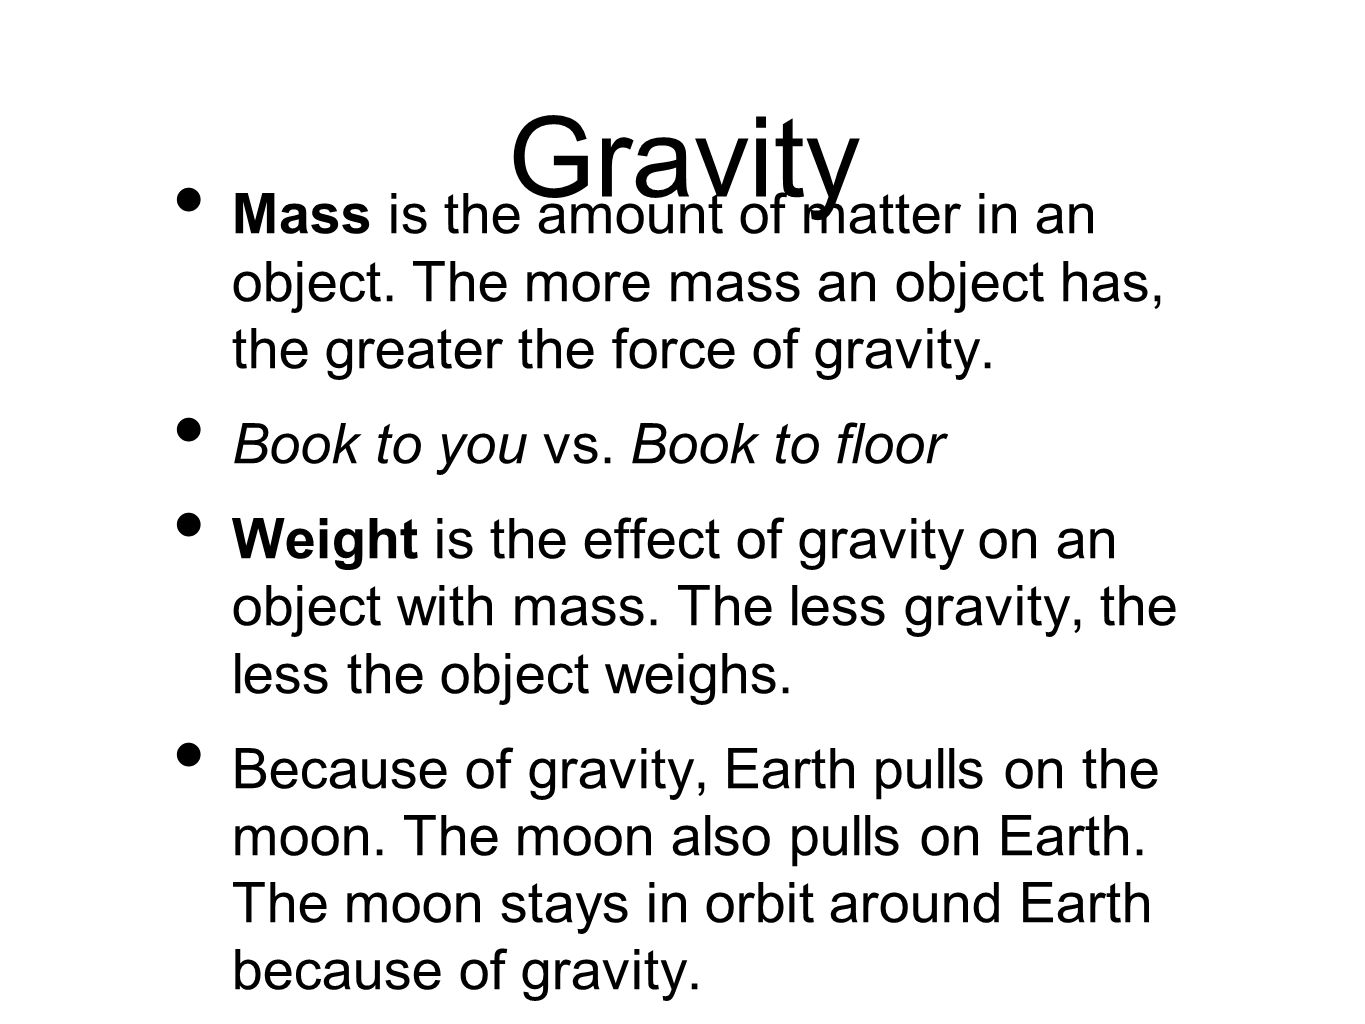 Gravity Mass is the amount of matter in an object. The more mass an object has, the greater the force of gravity.